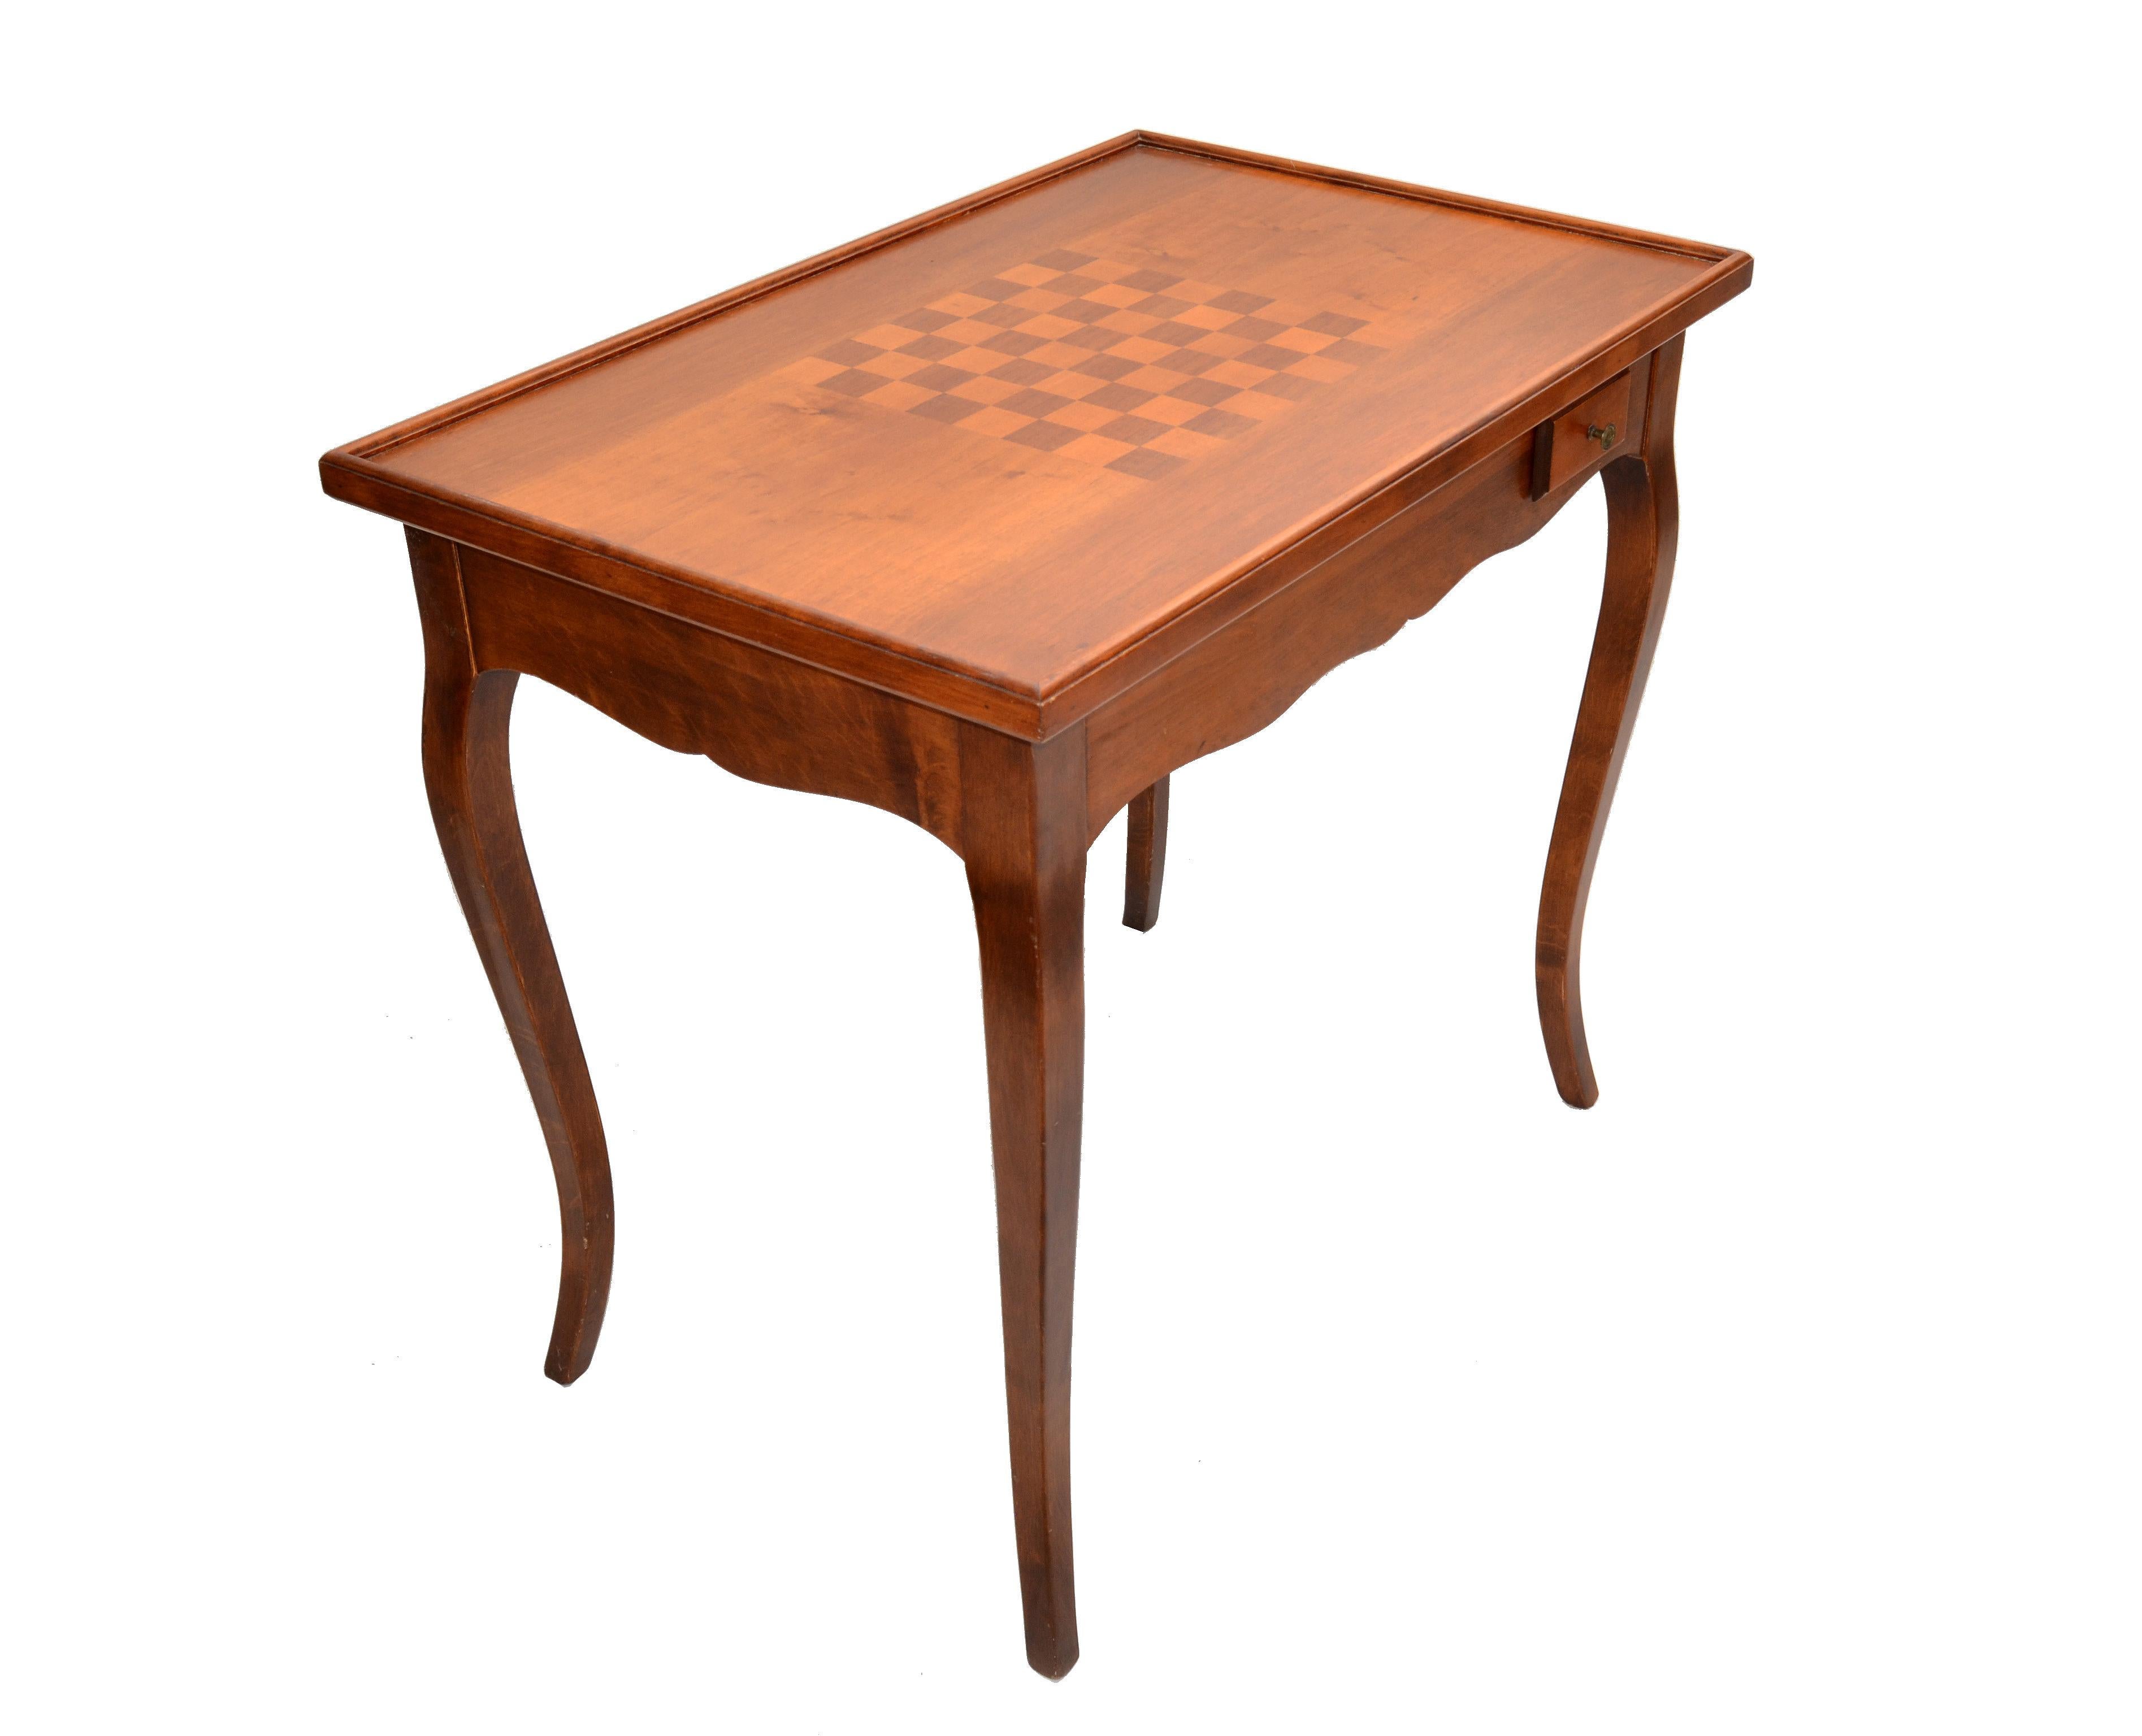 20th Century Italian Mahogany Inlayed Wood Flip Top Game Table Etched Glass Cover Mid-Century